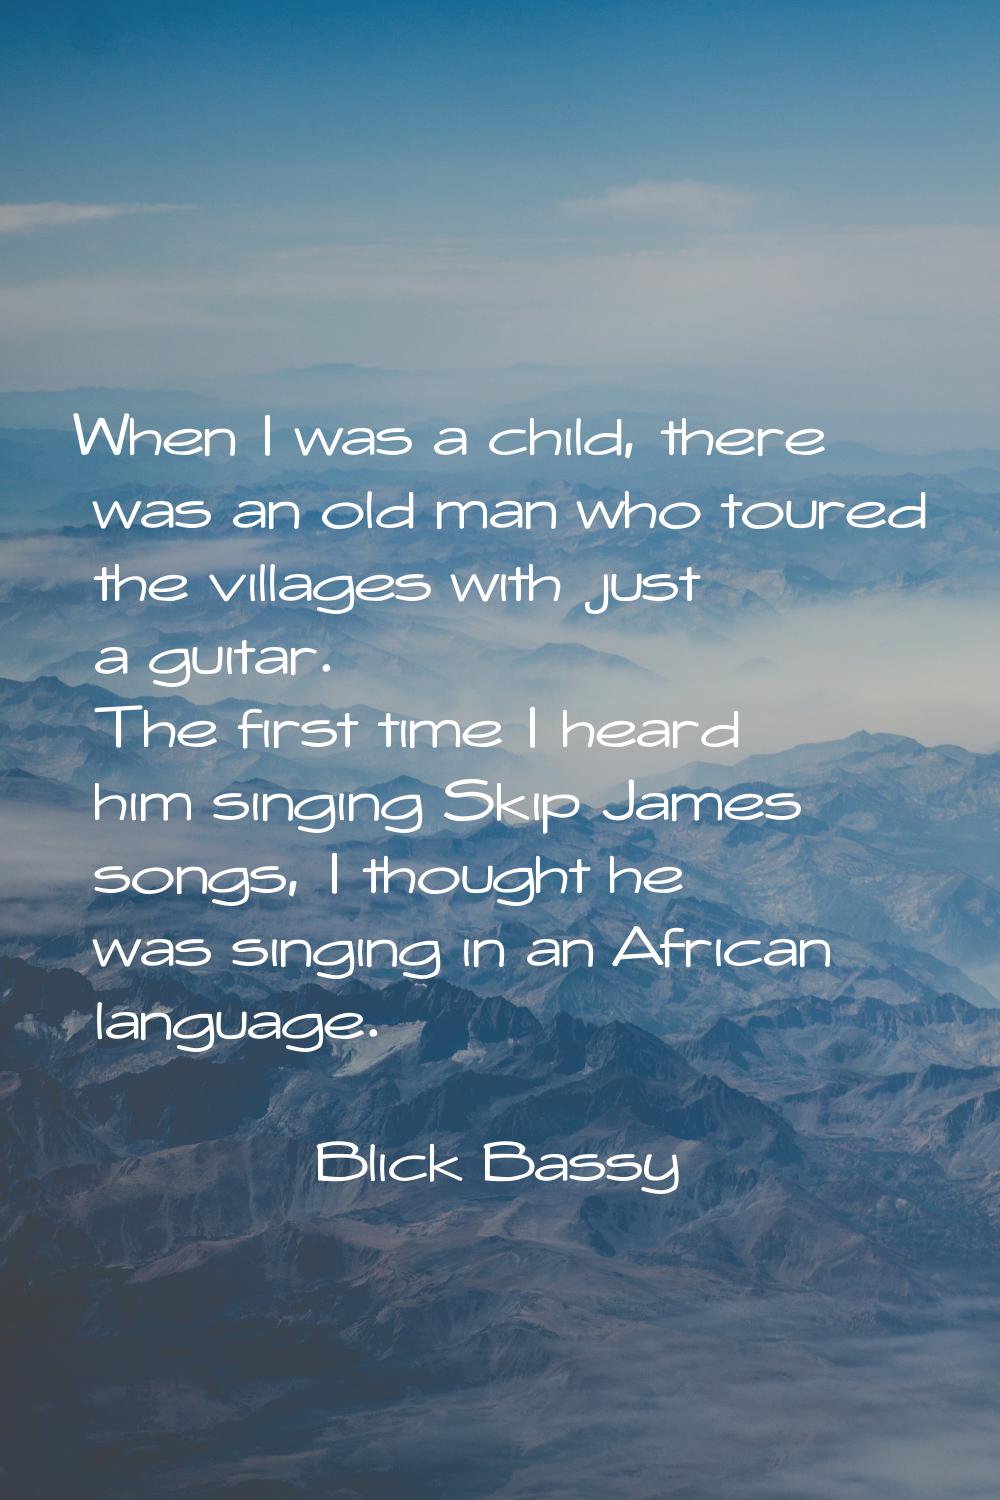 When I was a child, there was an old man who toured the villages with just a guitar. The first time